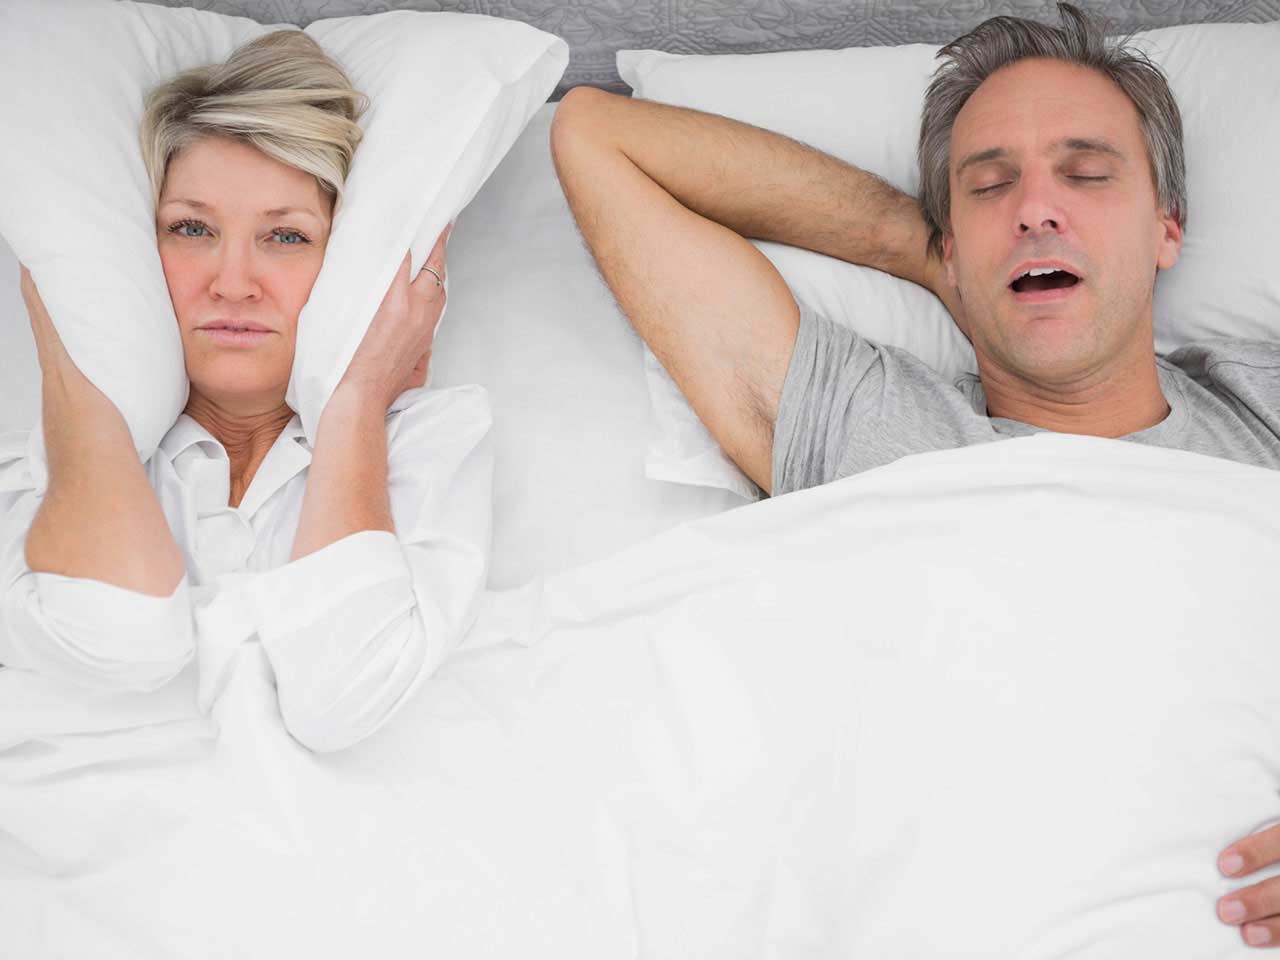 Mature couple in bed with the man snoring